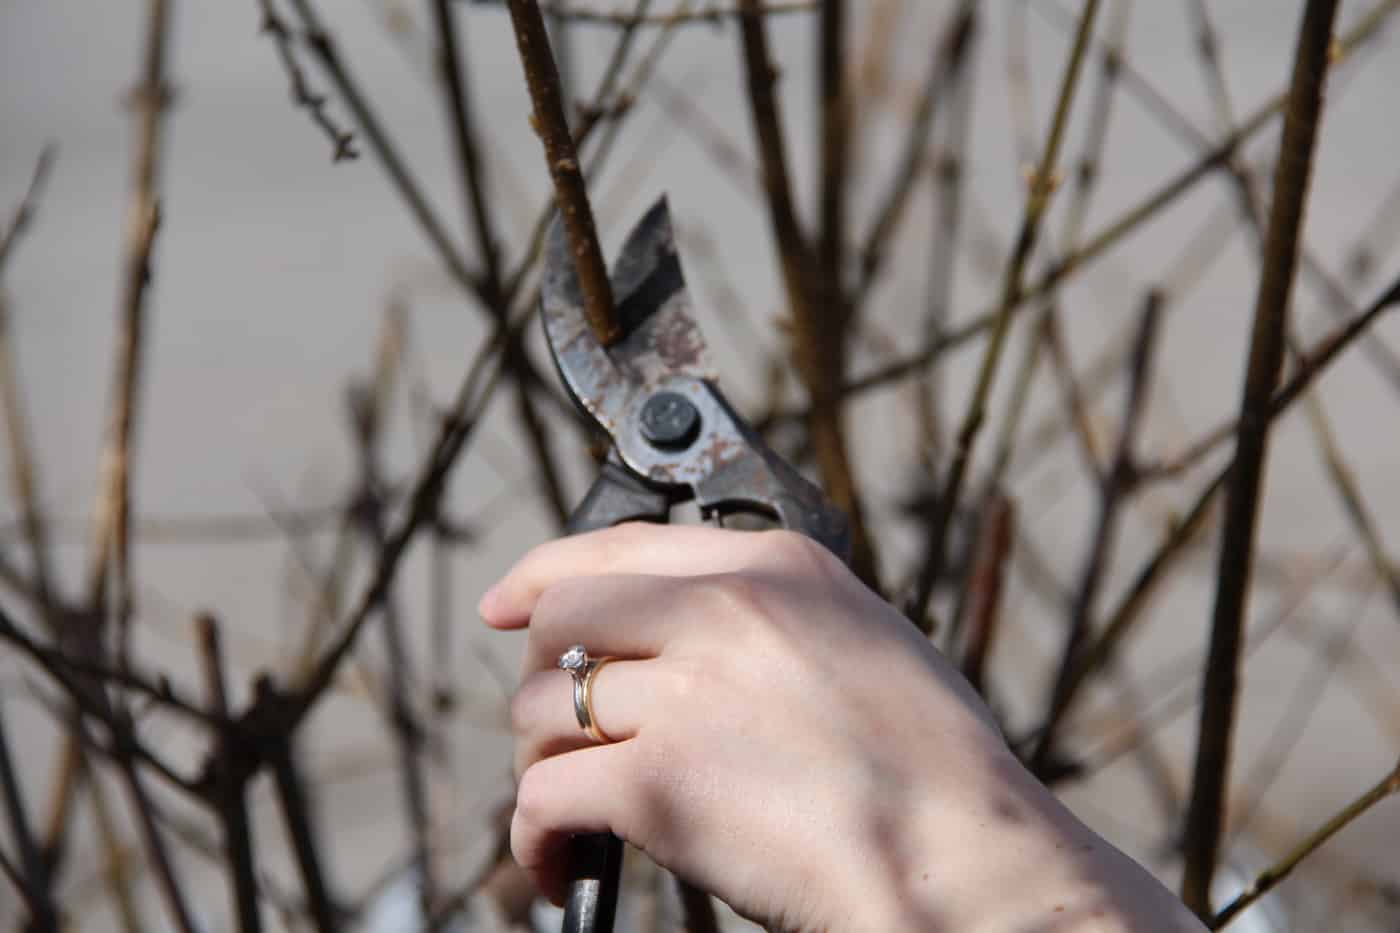 How to sharpen pruning shears